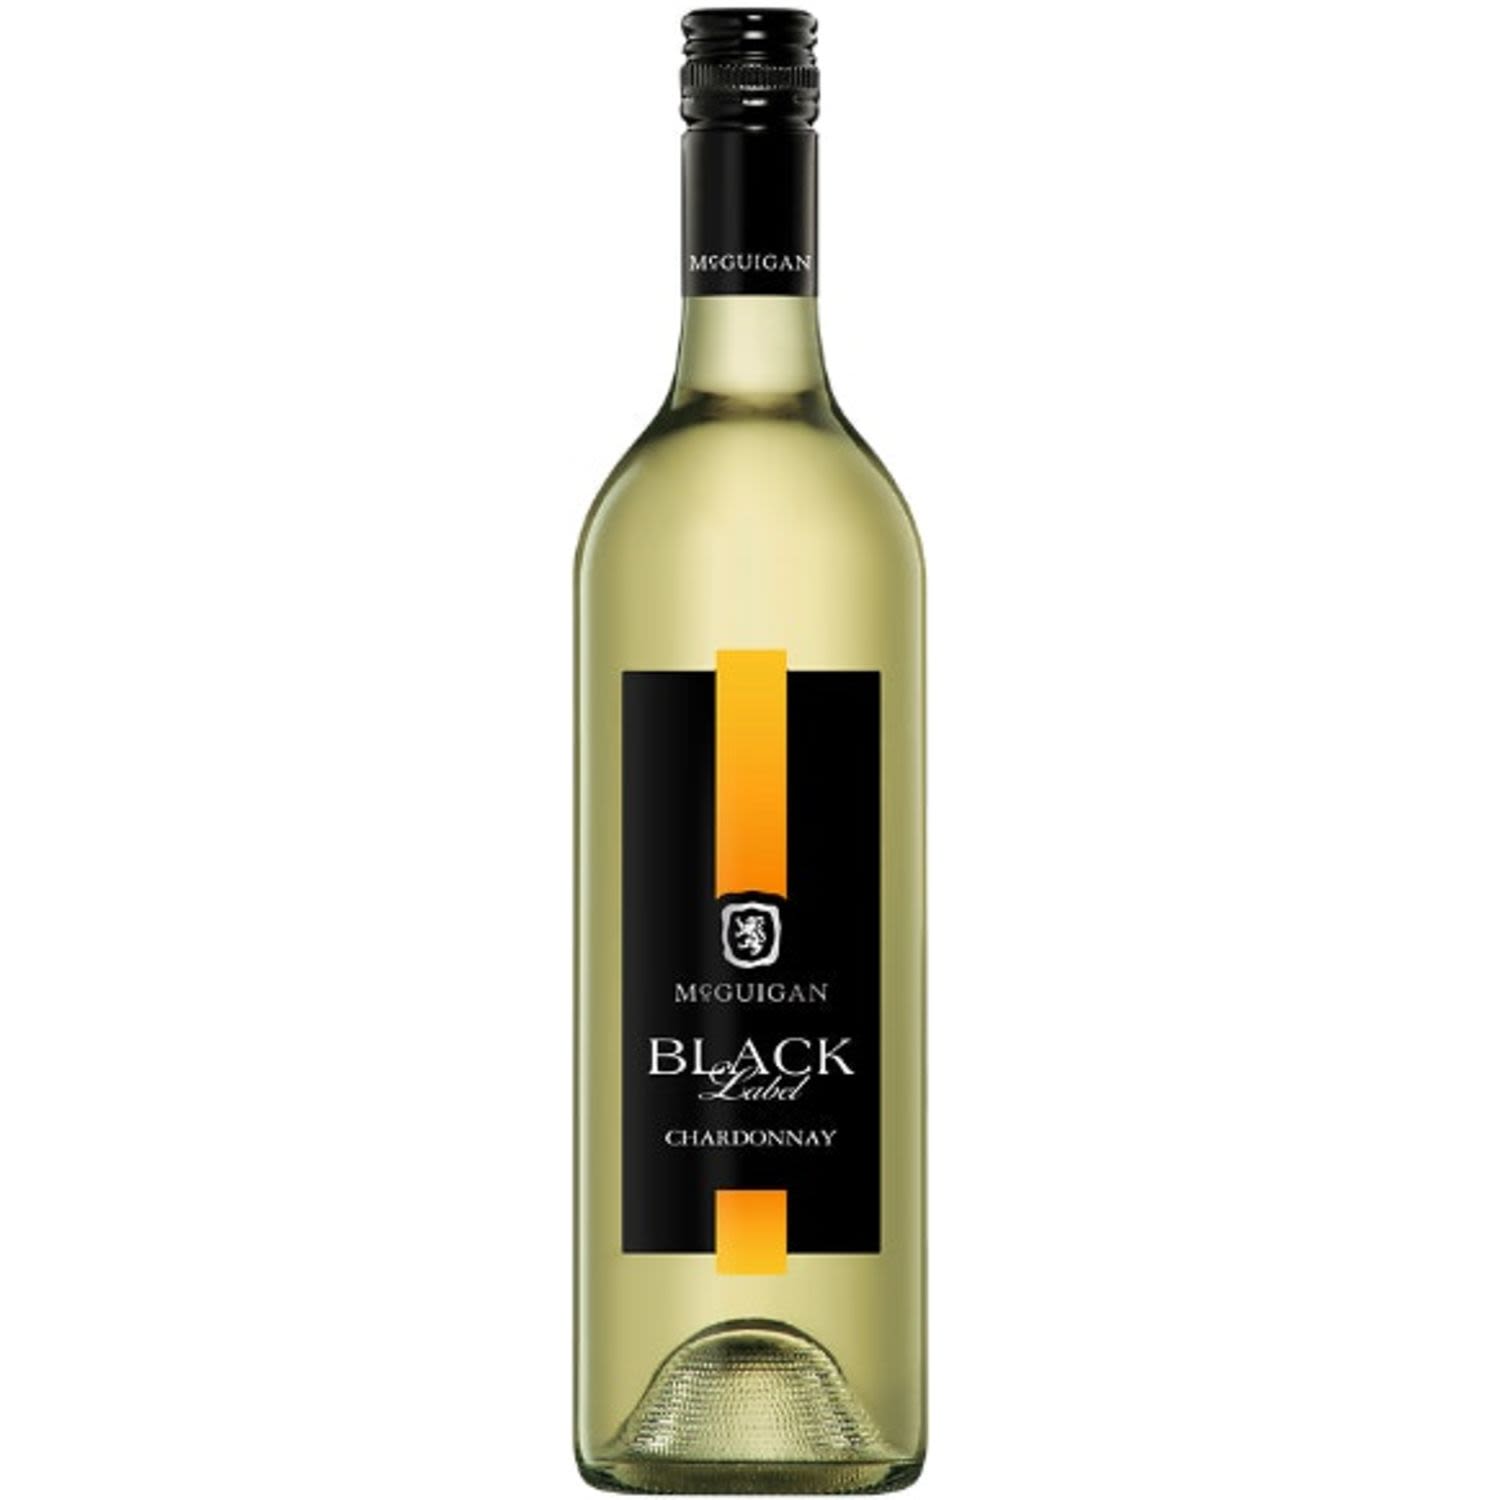 A flavoursome wine with a soft, smooth palate. It has the great sweet tropical fruit and melon flavours of Chardonnay with a touch of vanilla oak and a clean, lingering finish.<br /> <br />Alcohol Volume: 13.00%<br /><br />Pack Format: Bottle<br /><br />Standard Drinks: 7.7</br /><br />Pack Type: Bottle<br /><br />Country of Origin: Australia<br /><br />Region: South Eastern Australia<br /><br />Vintage: '2018<br />